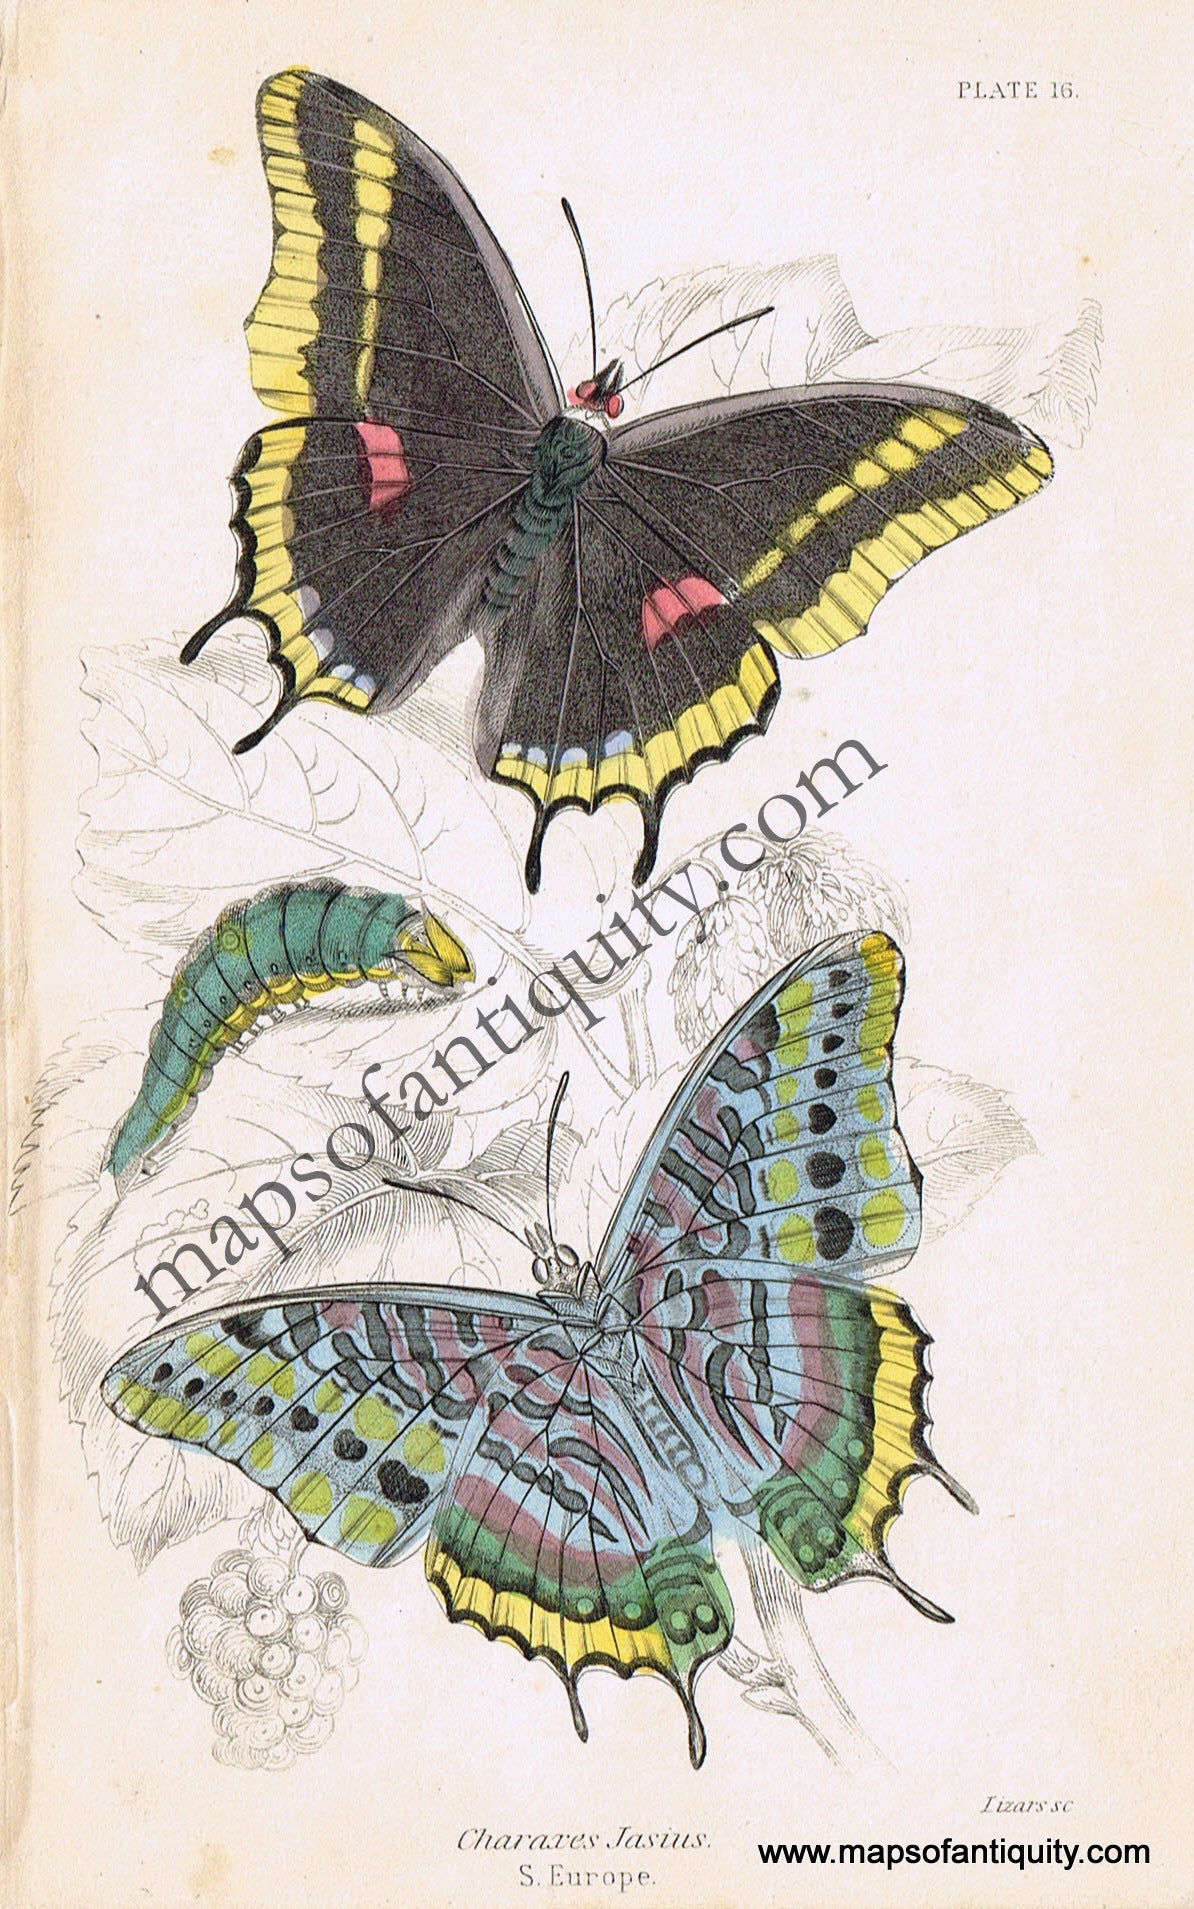 Antique-Hand-Colored-Print-Charaxes-jasius-Antique-Prints-Natural-History-Insects-1840-Duncan-Maps-Of-Antiquity